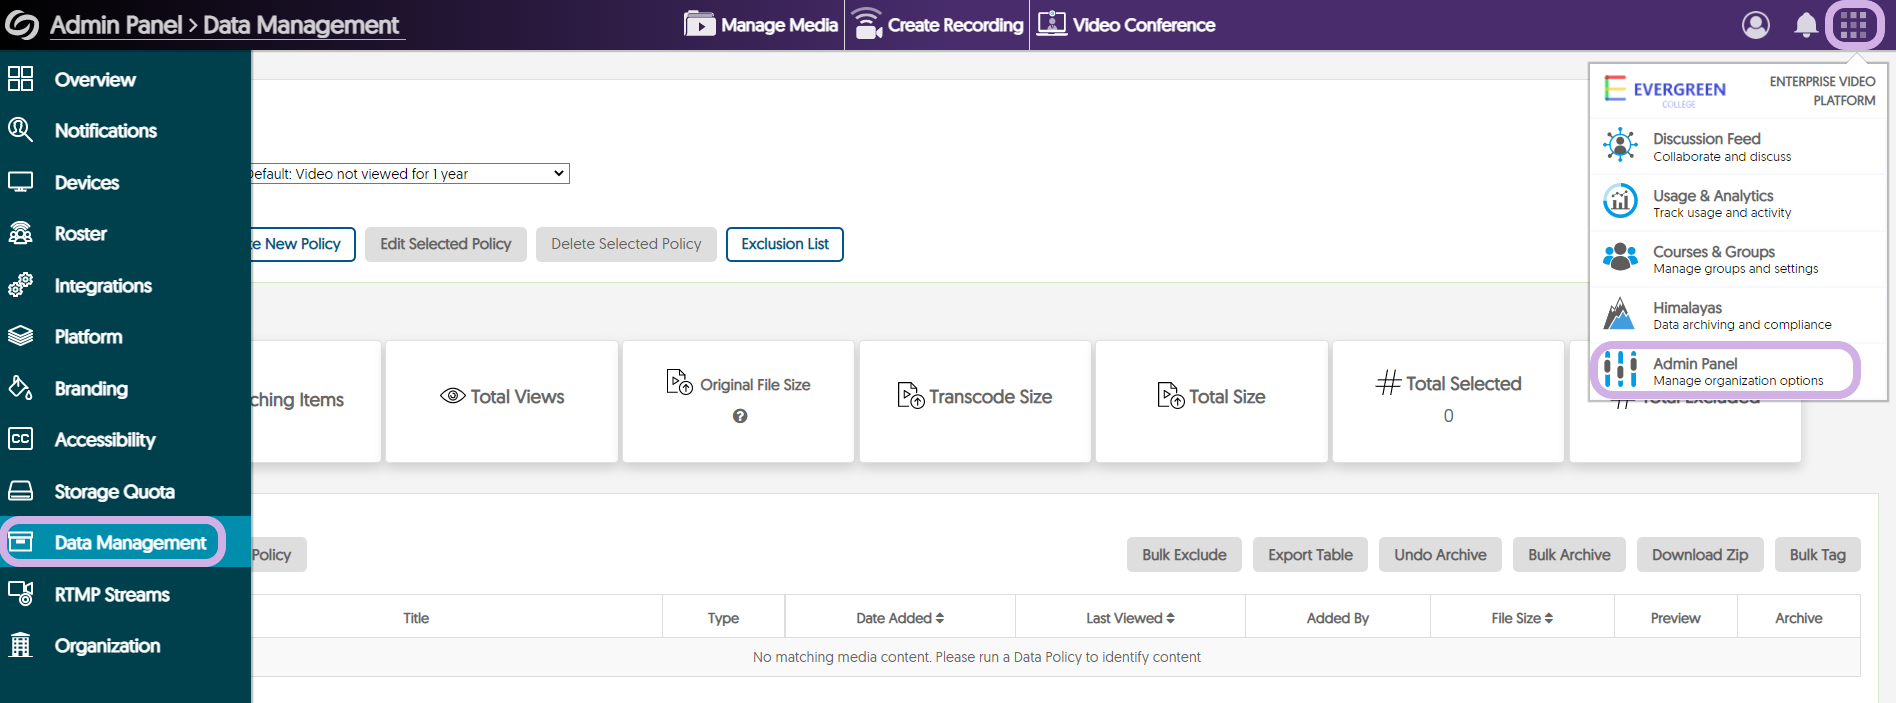 The Admin Panel view with Data Management highlighted in the left-hand navigation menu.